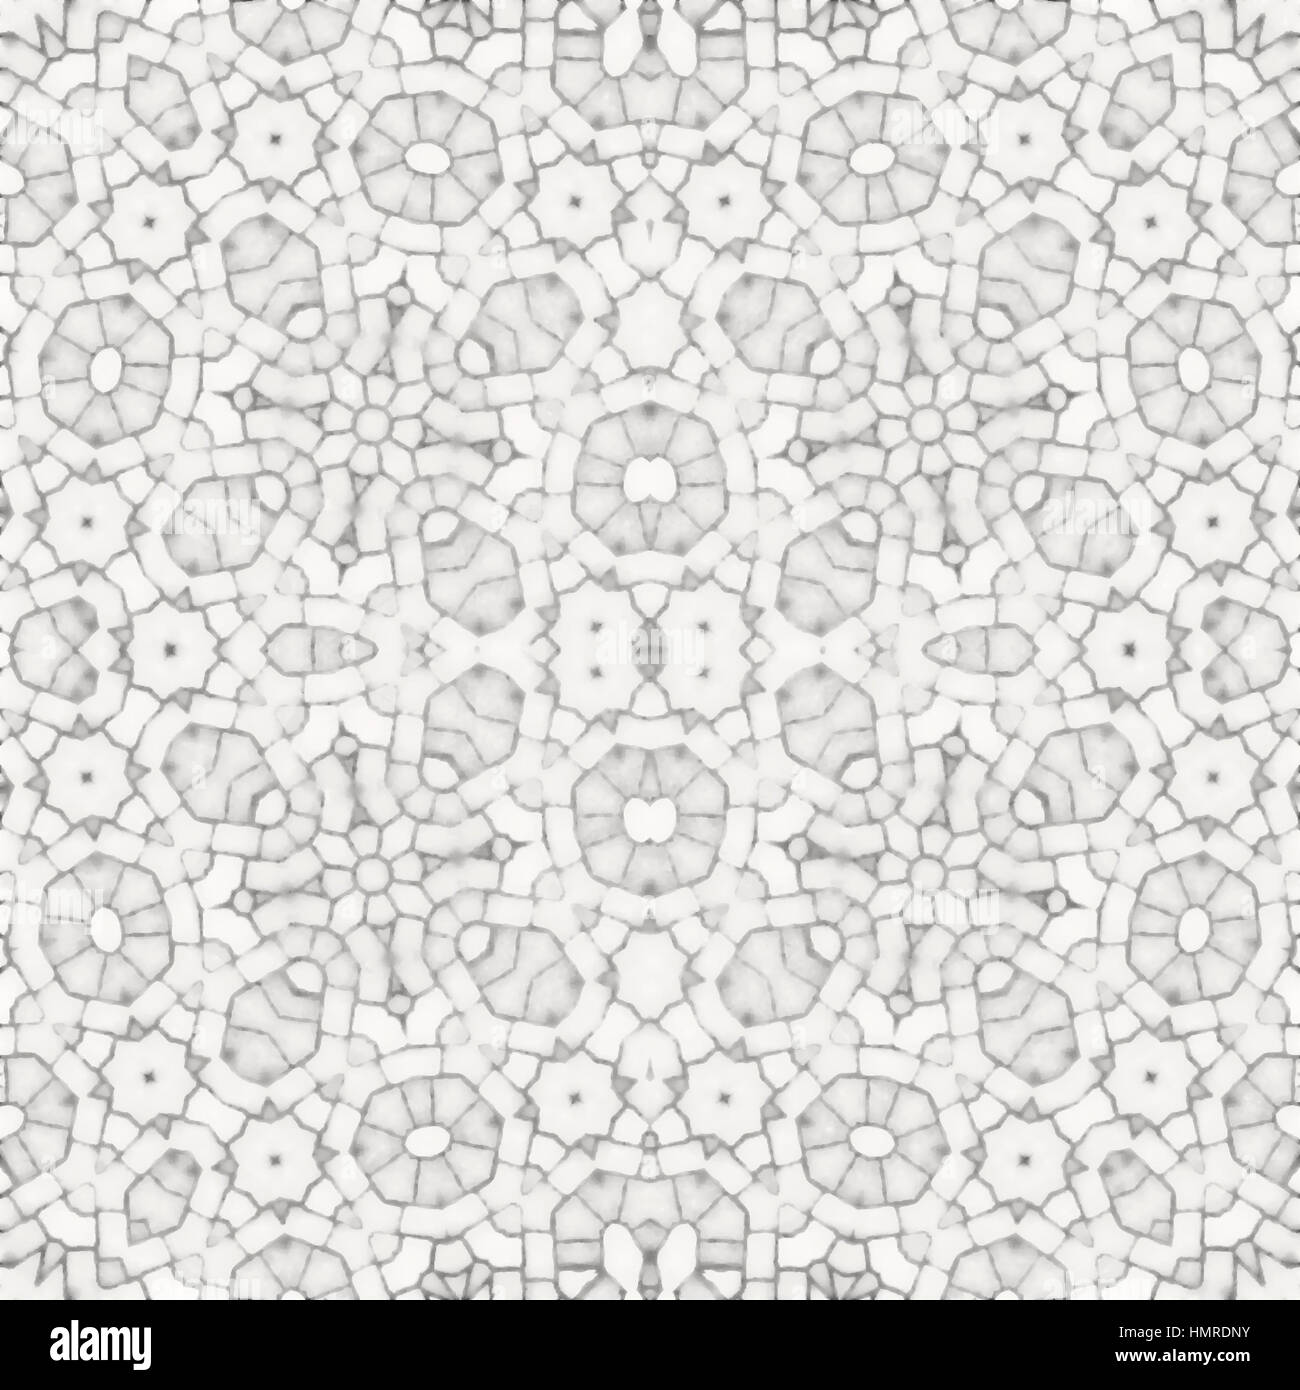 White texture wall seamless background or pattern. Stone pavement or cobblestones. History, fantasy or mystical shapes. Stock Photo